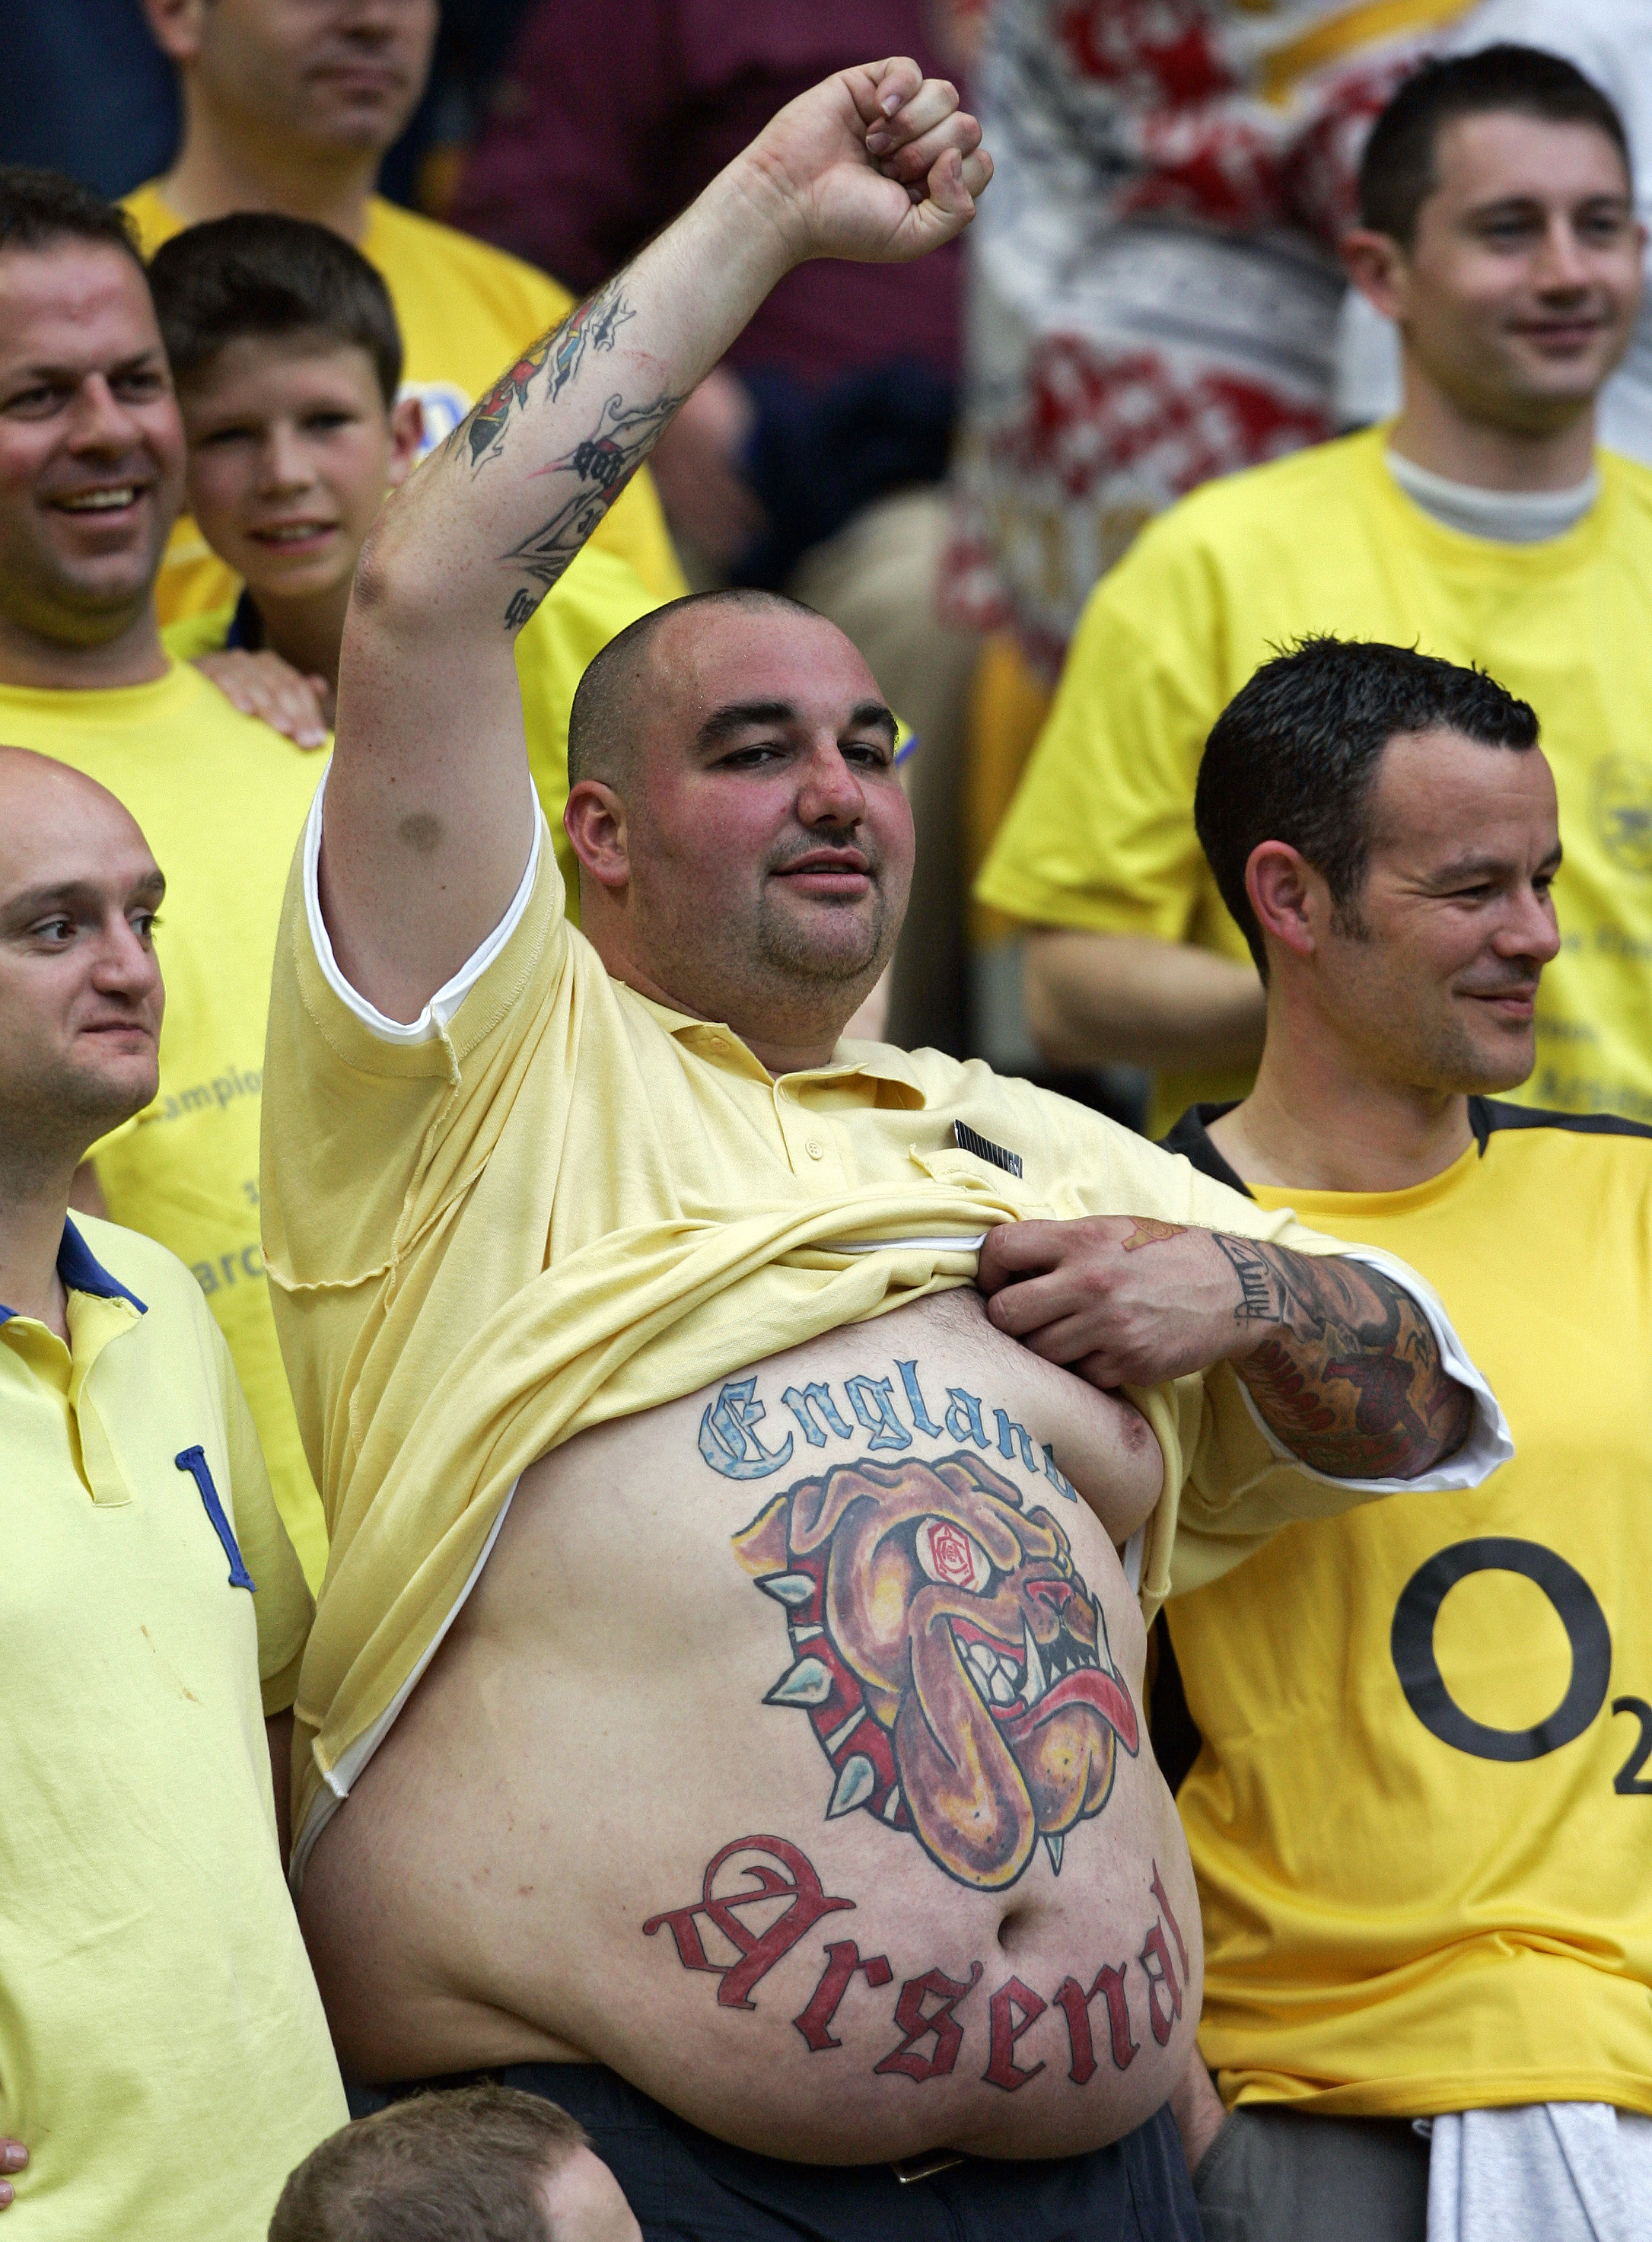 An Arsenal fan shows his tattoo before the Champions League final soccer match against at the Stade de France in Saint Denis, France on May 17, 2006.